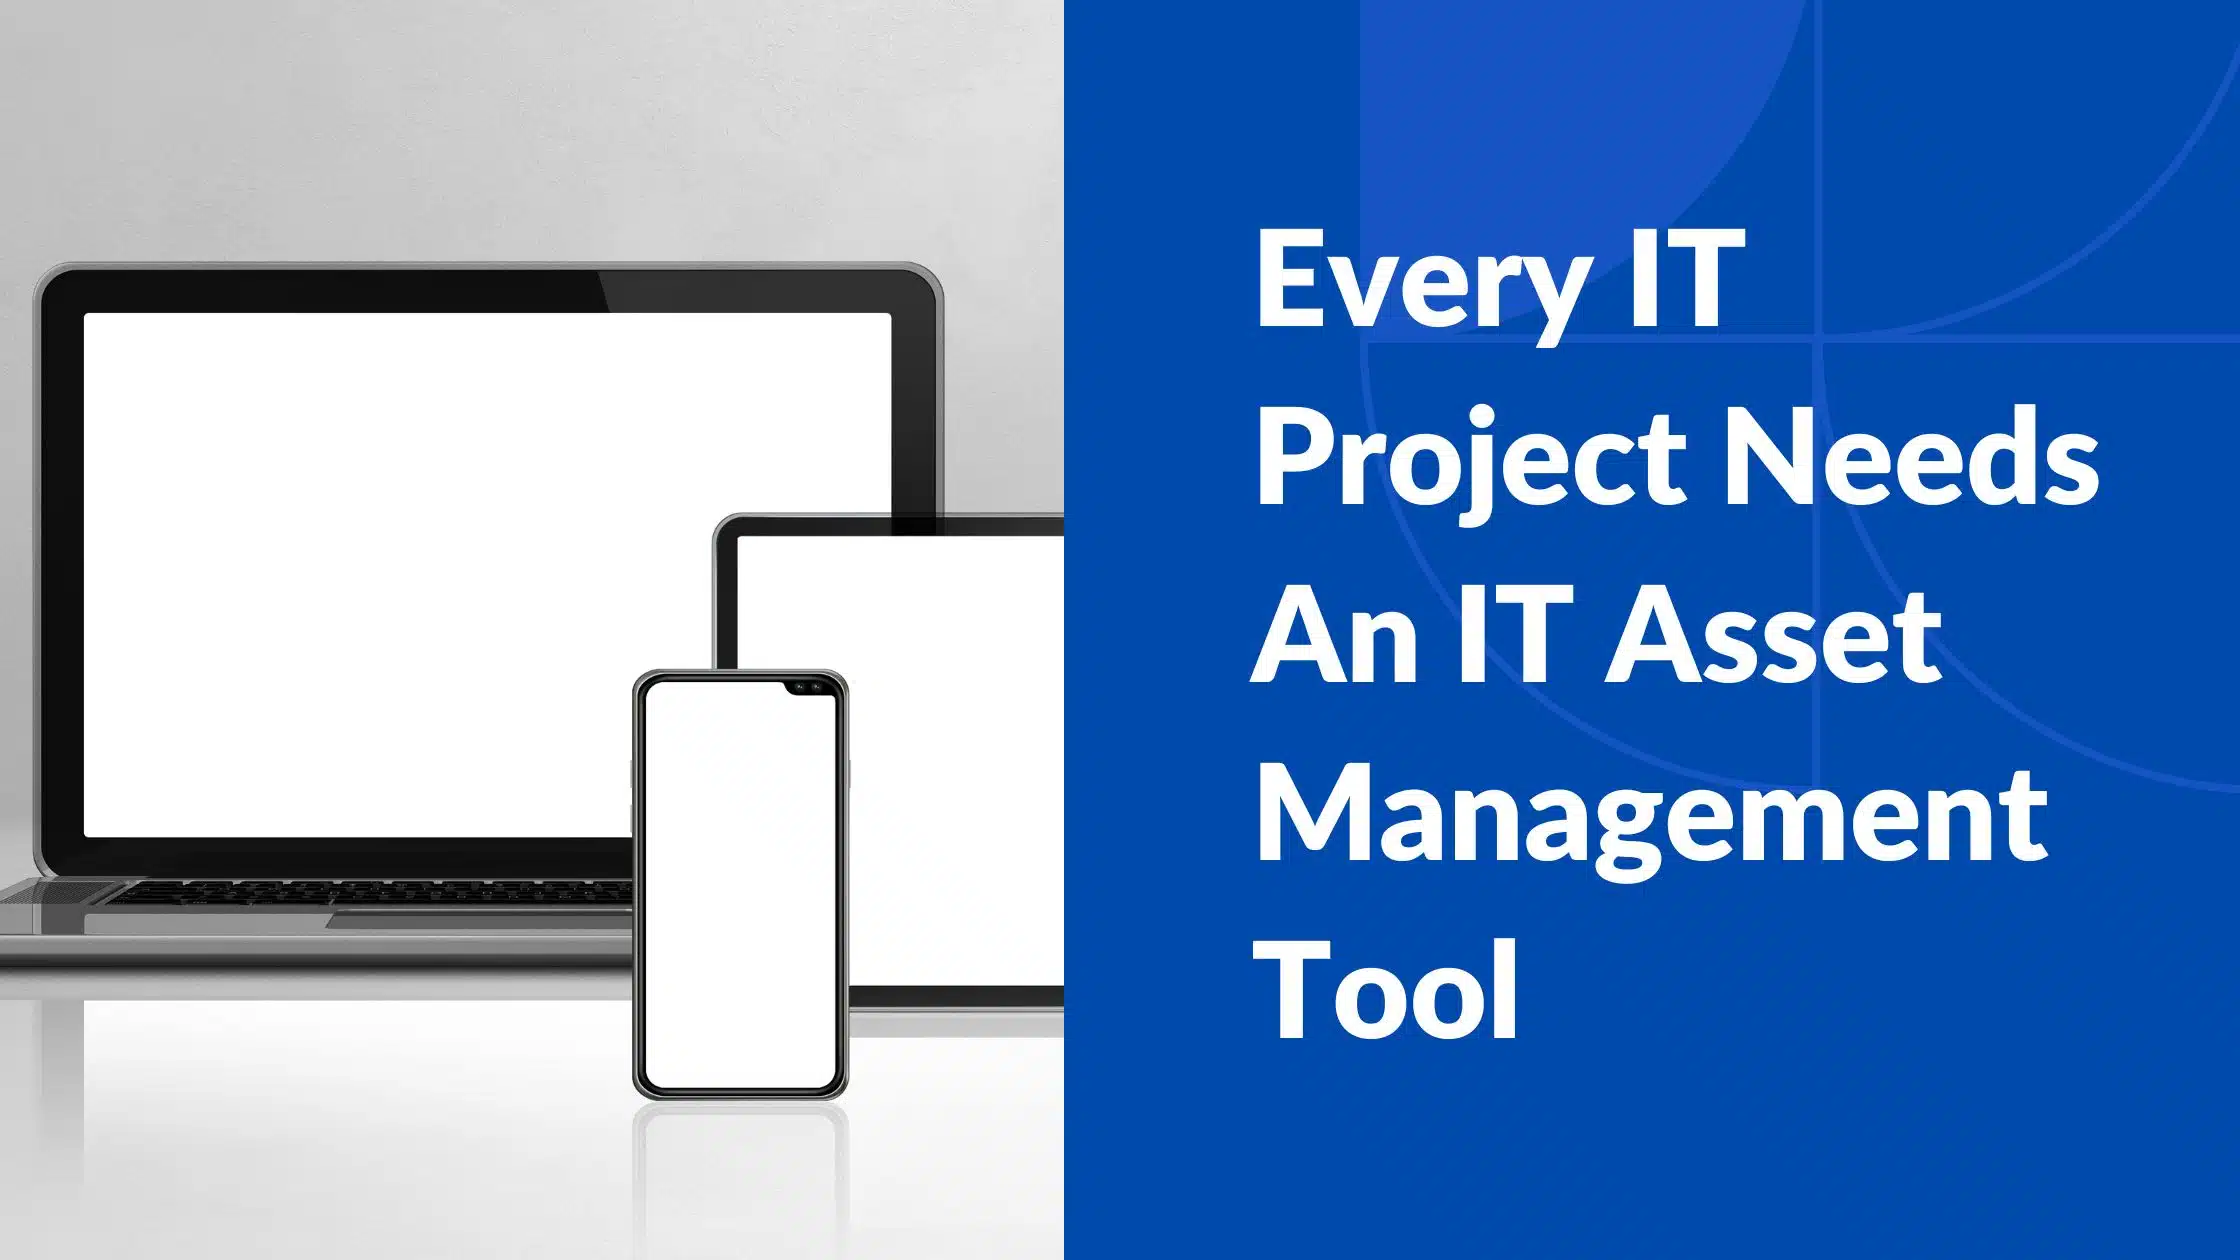 Every IT Project Needs An IT Asset Management Tool